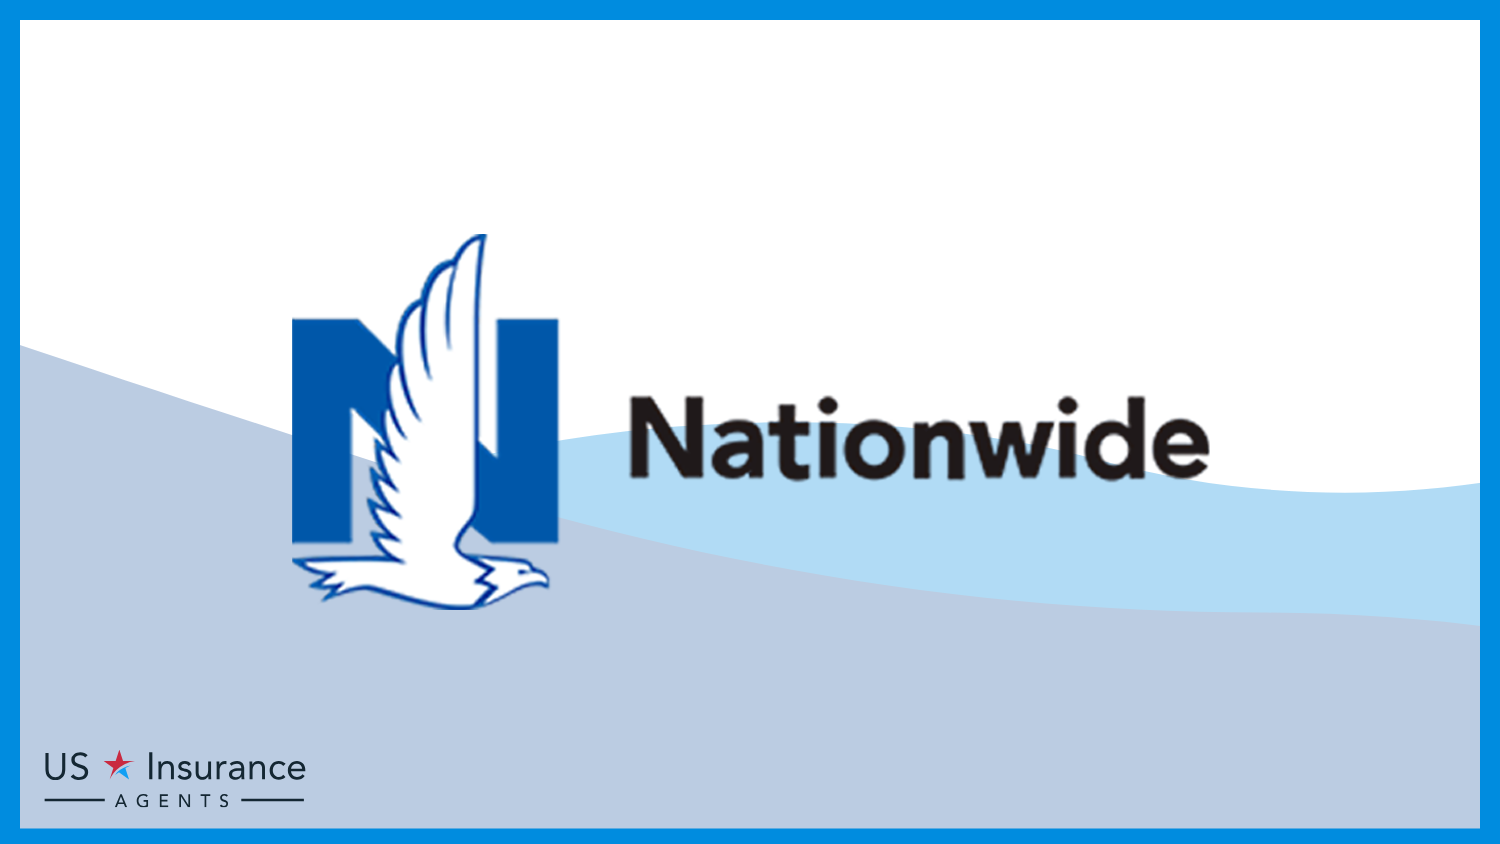 Nationwide: Best Business Insurance for Antique Stores